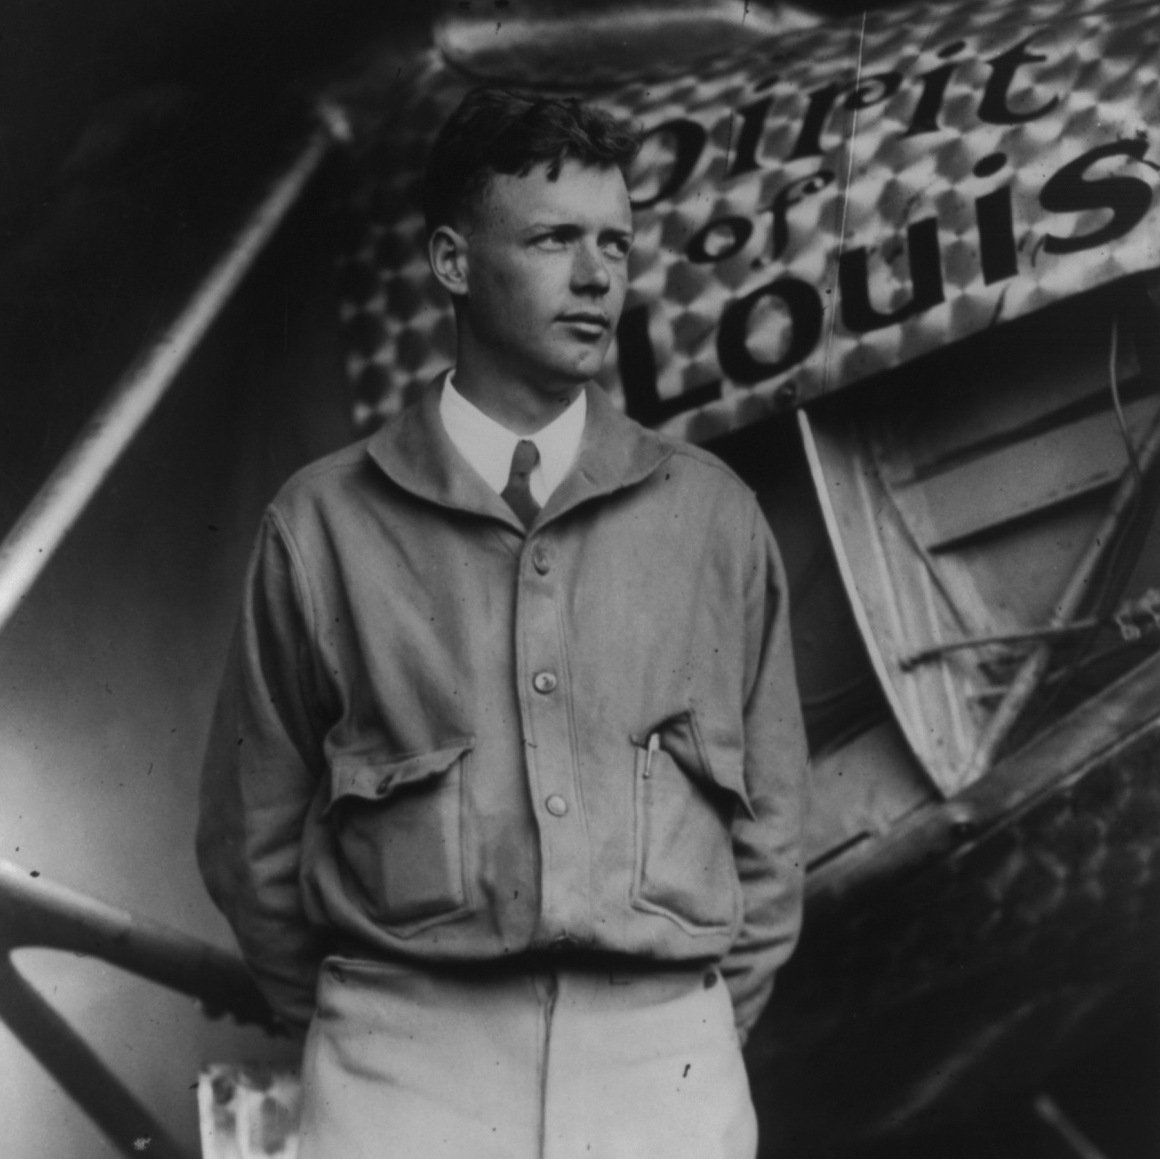 Charles Lindbergh is shown here on May 31, 1927, with the “Spirit of St. Louis” he had piloted across the Atlantic 10 days earlier. Photo courtesy of the Library of Congress. 